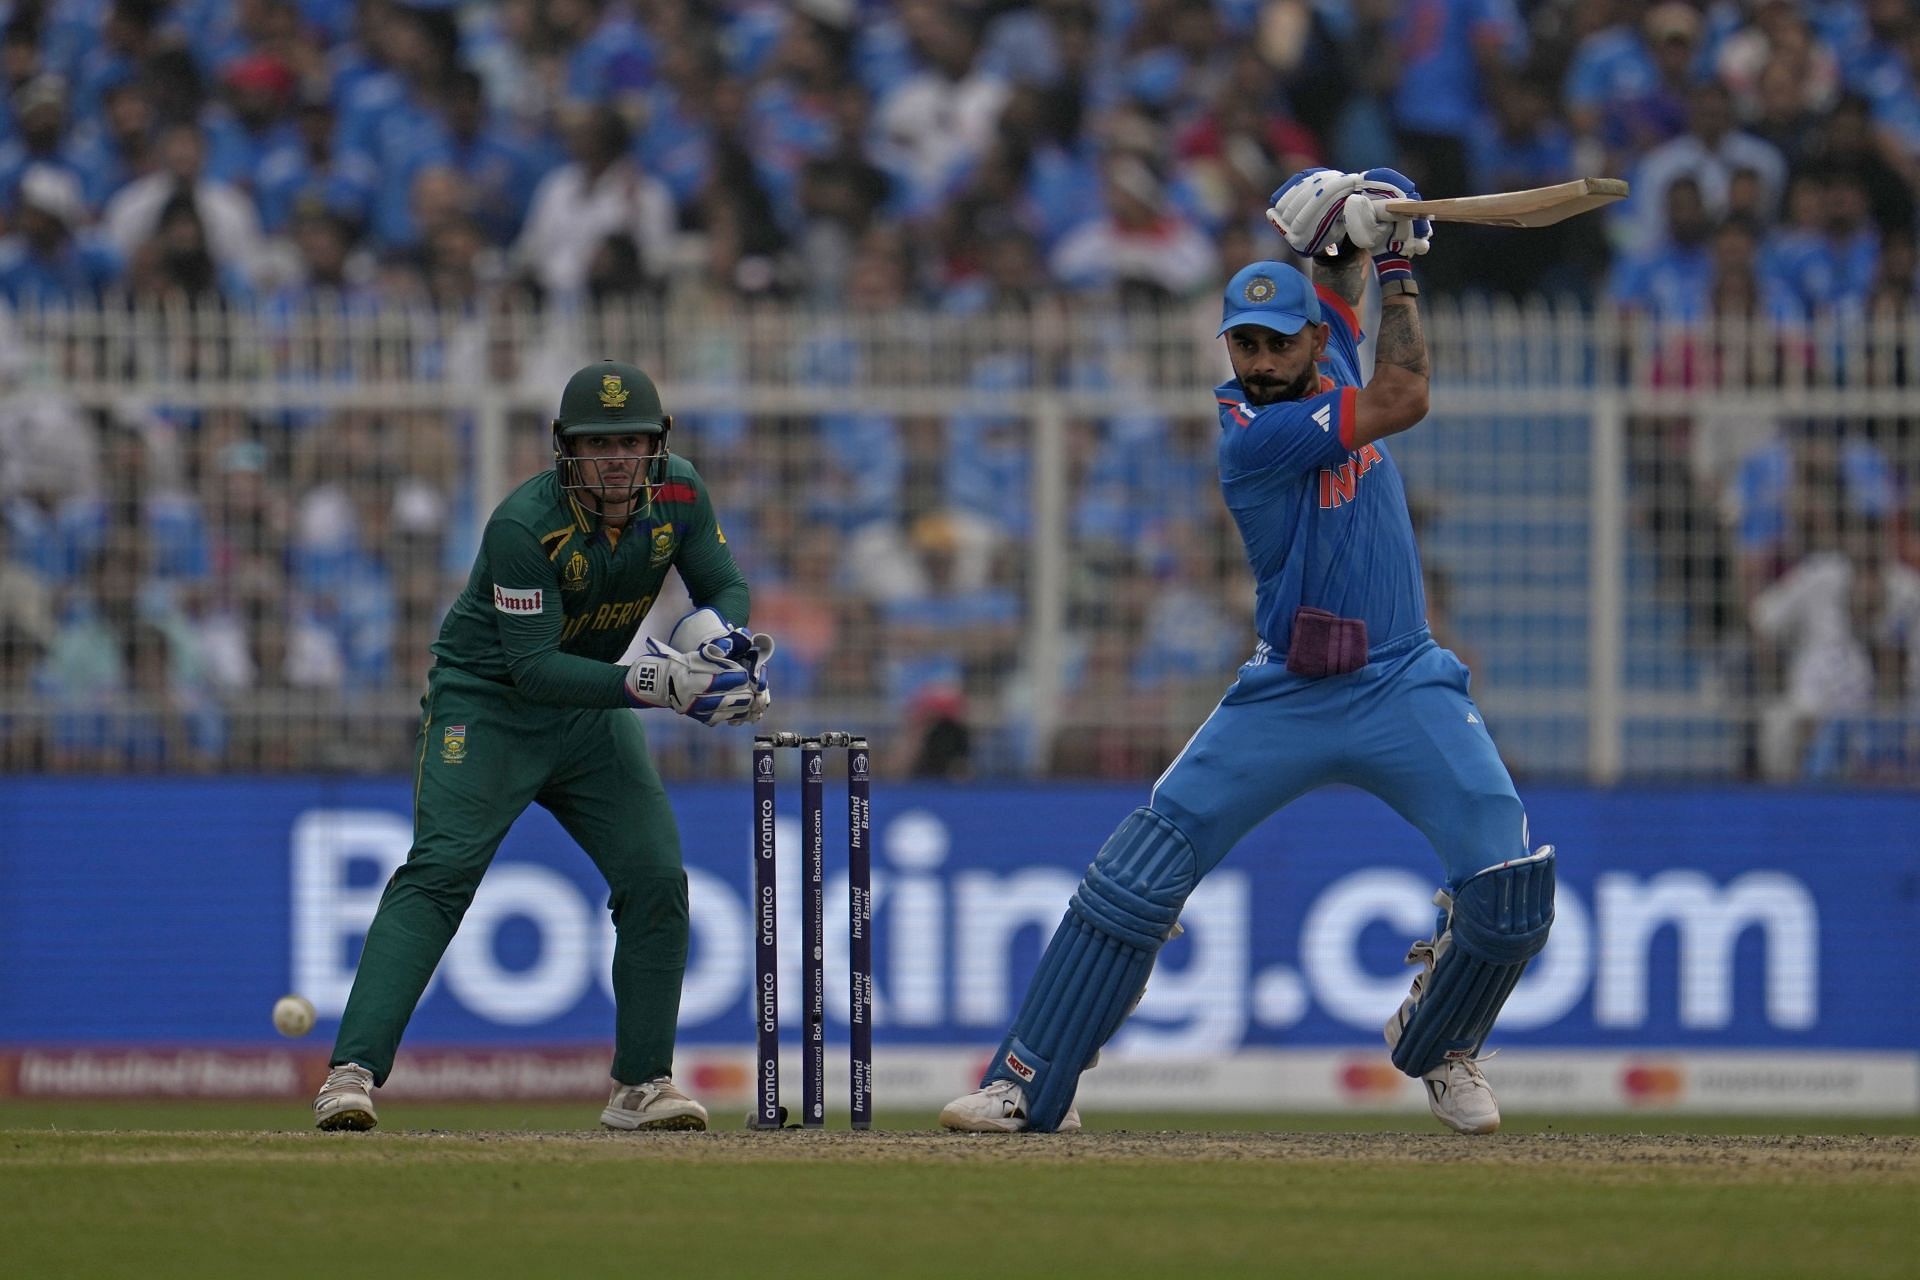 India vs South Africa: What happened in yesterday's match at 2023 World Cup?